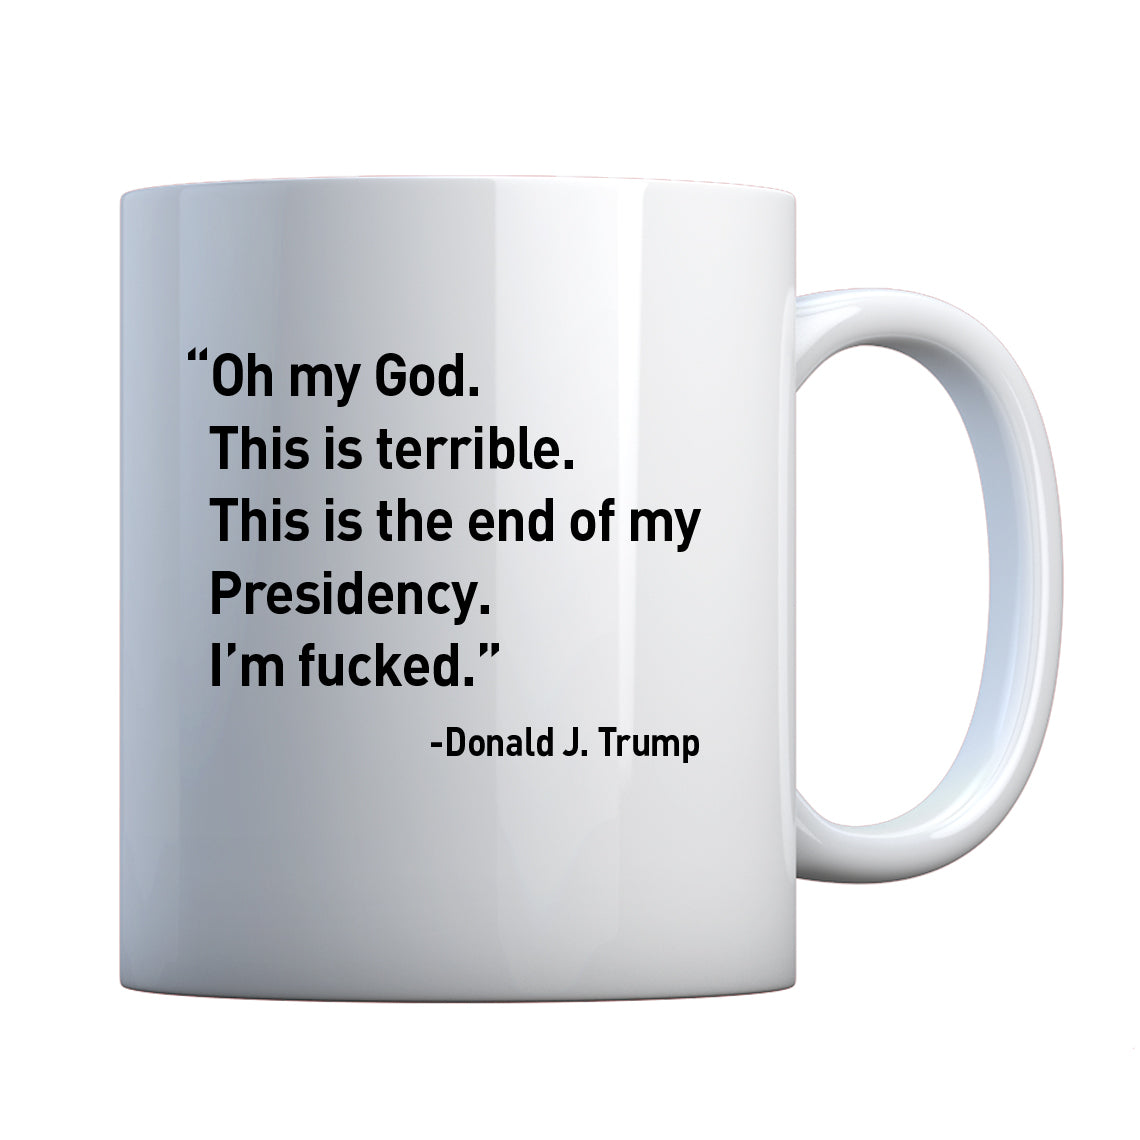 This is the End of my Presidency Ceramic Gift Mug